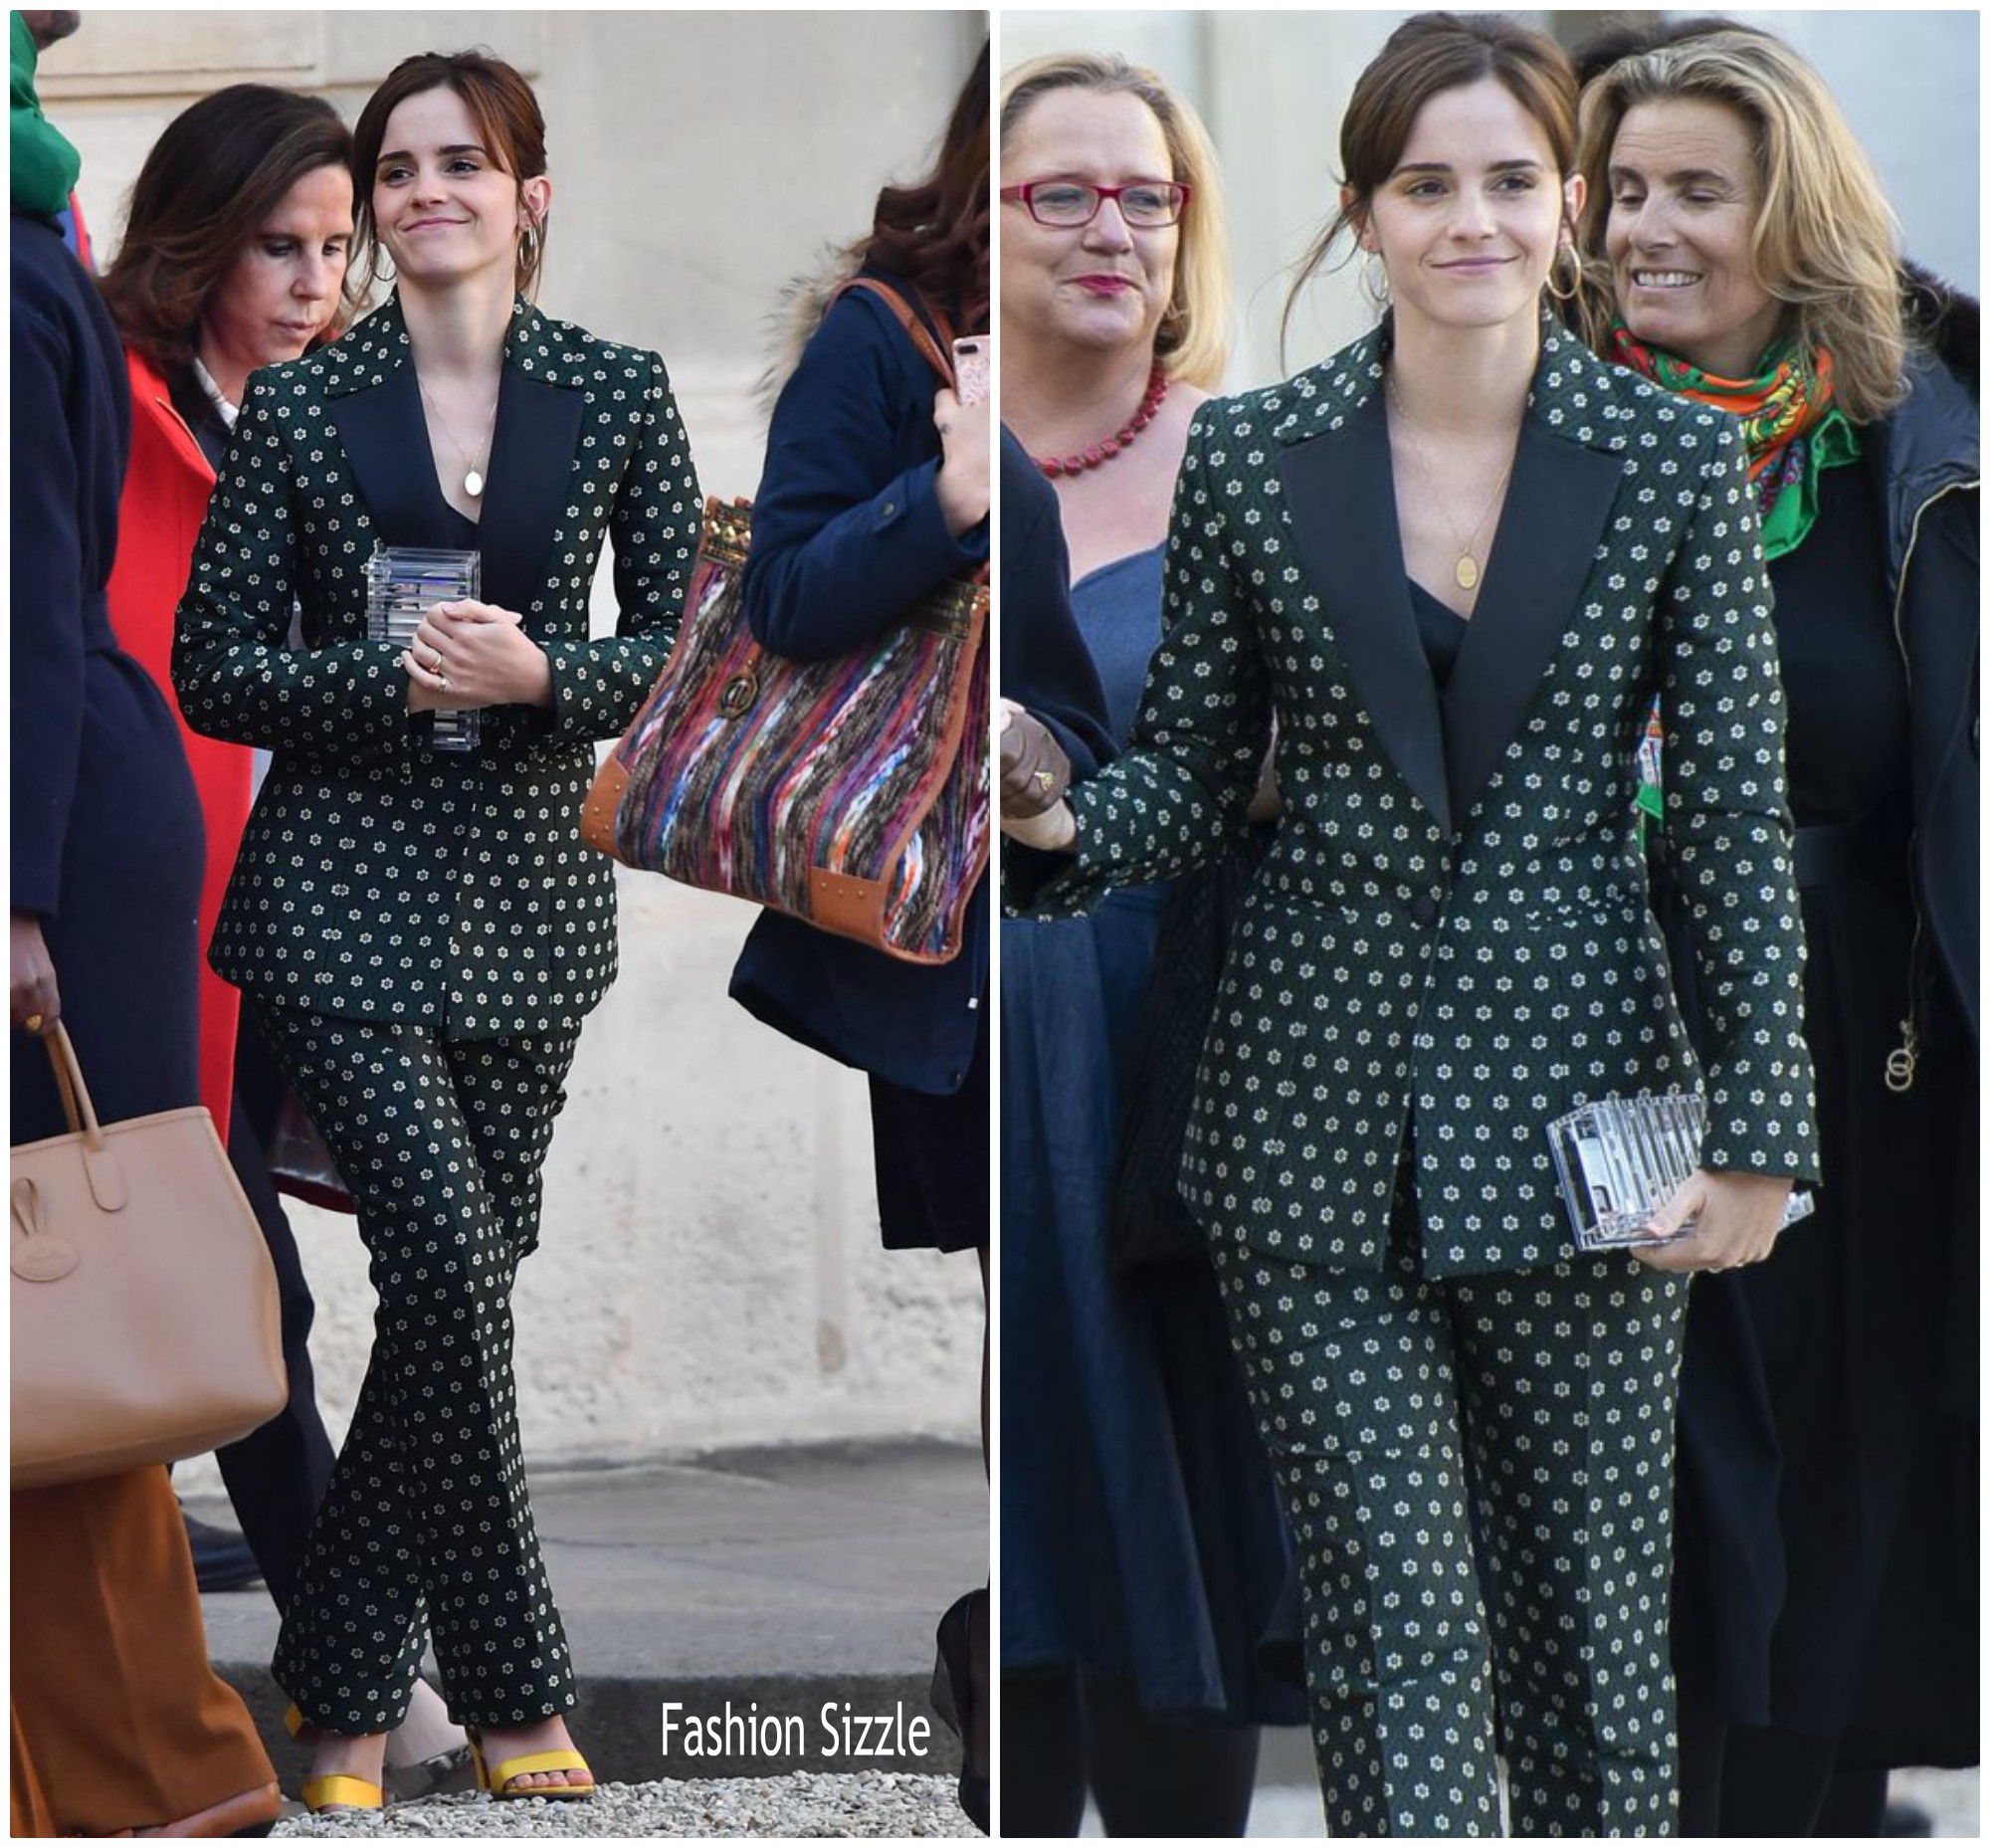 emma-watson-in-alexachung-first-meeting-of-the-g7-gender-equality-advisory-council